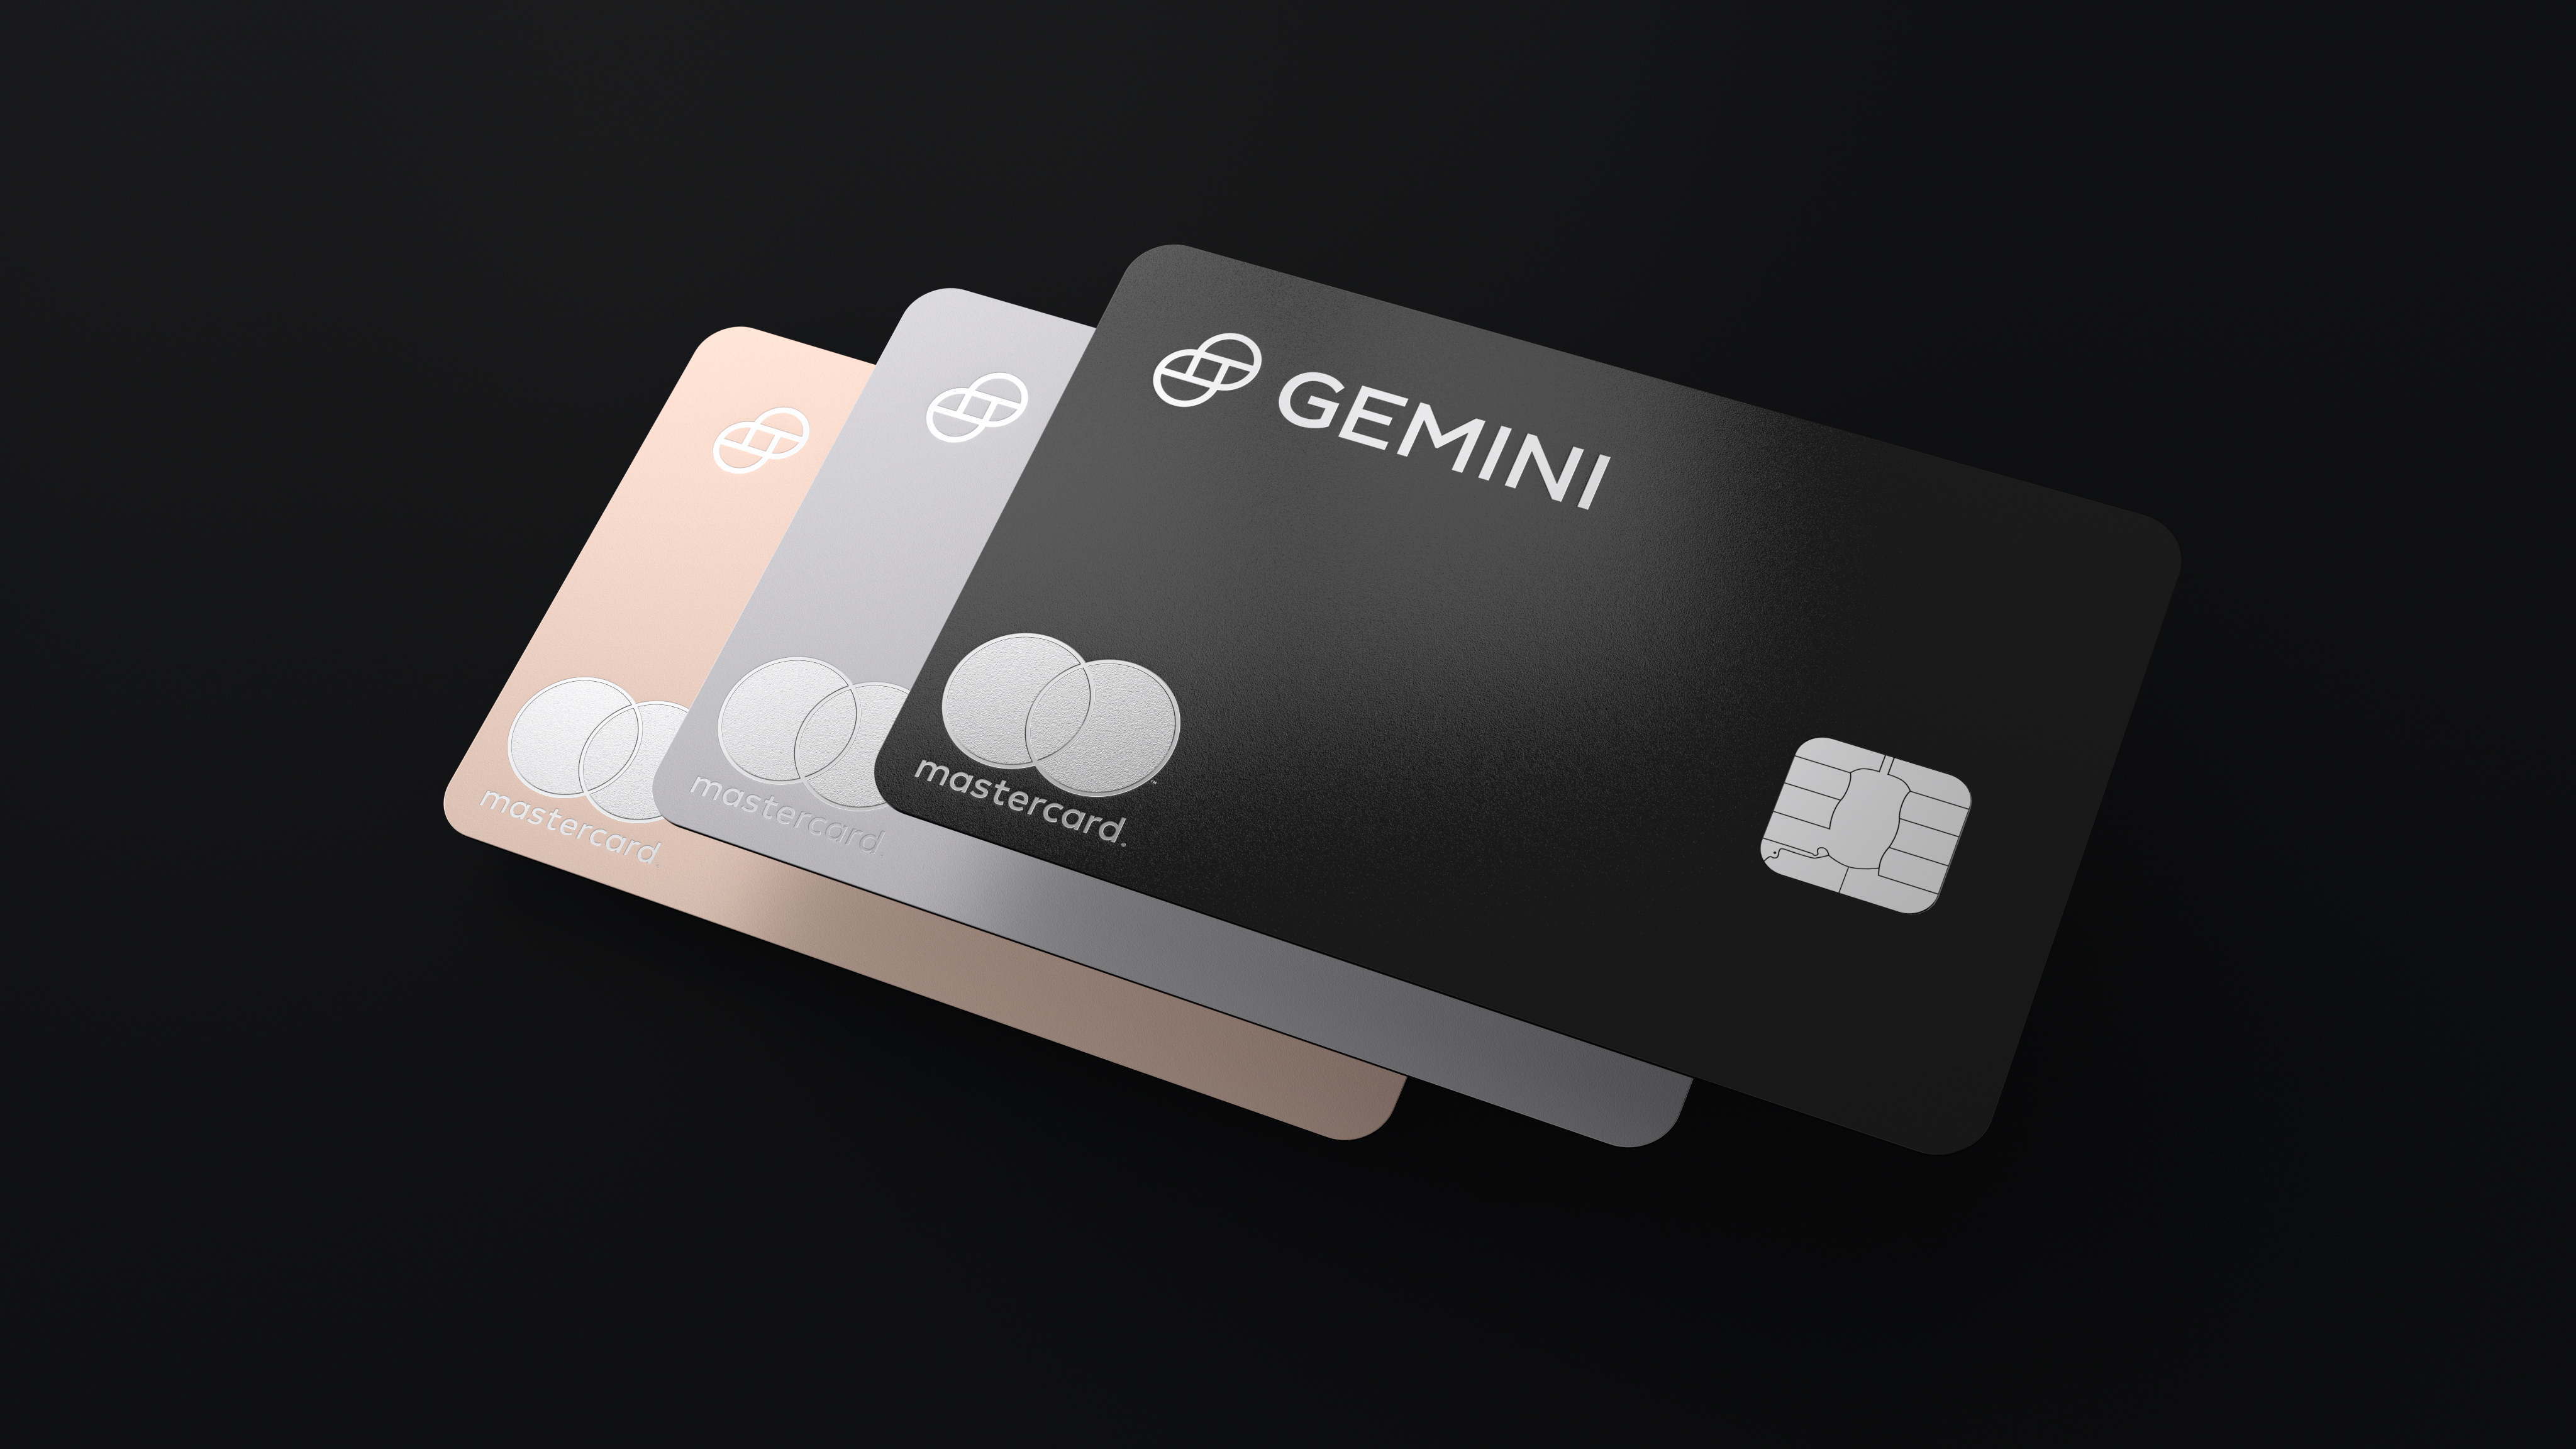 Gemini Partners with Mastercard to Launch New Crypto Rewards Credit Card  this Summer | Mastercard Newsroom